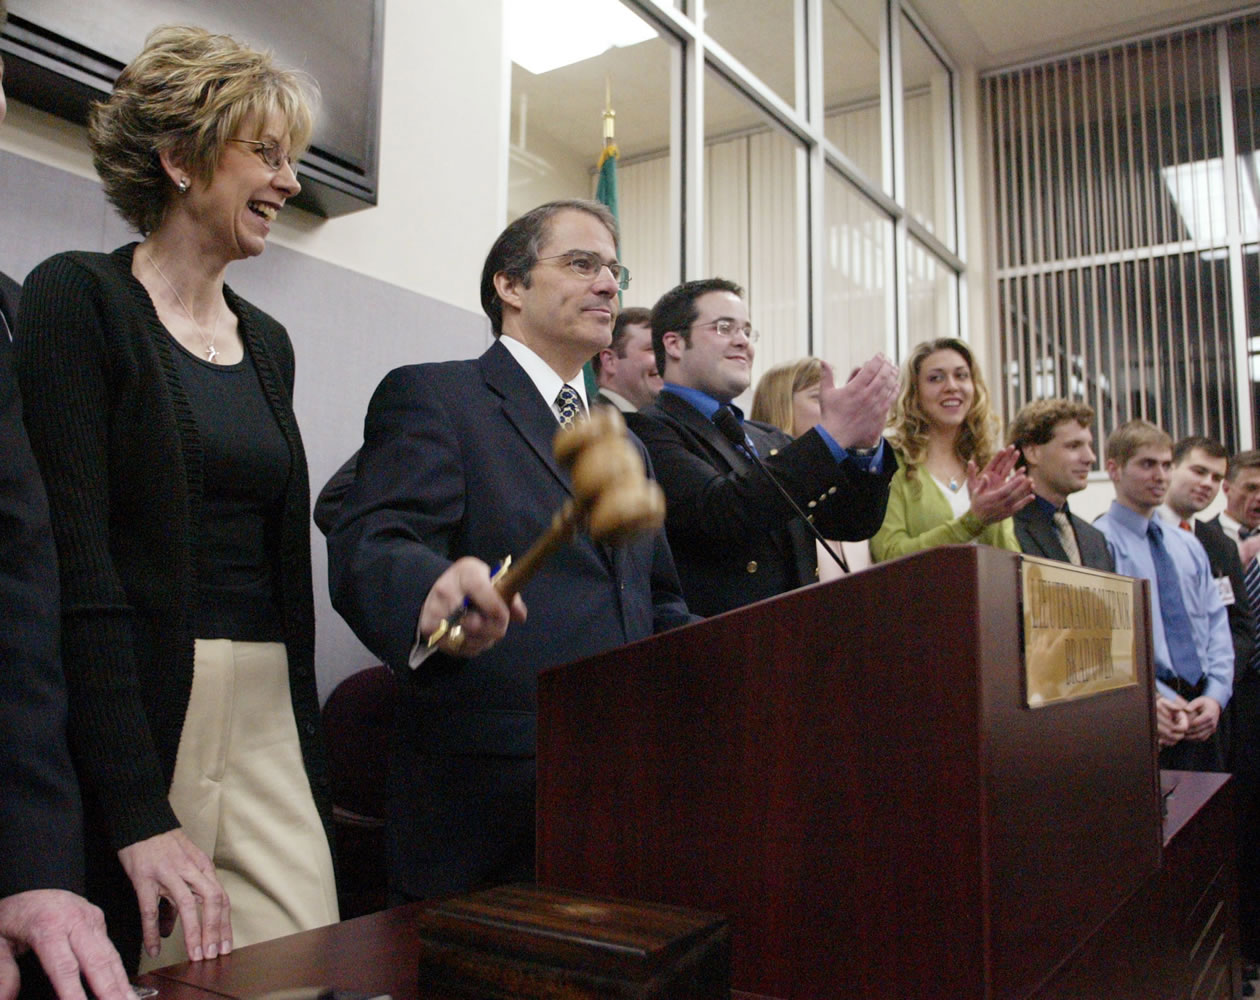 In this 2004 file photo, Lt. Gov. Brad Owen with his wife, Linda, strikes the gavel in the Senate ending the session in Olympia.